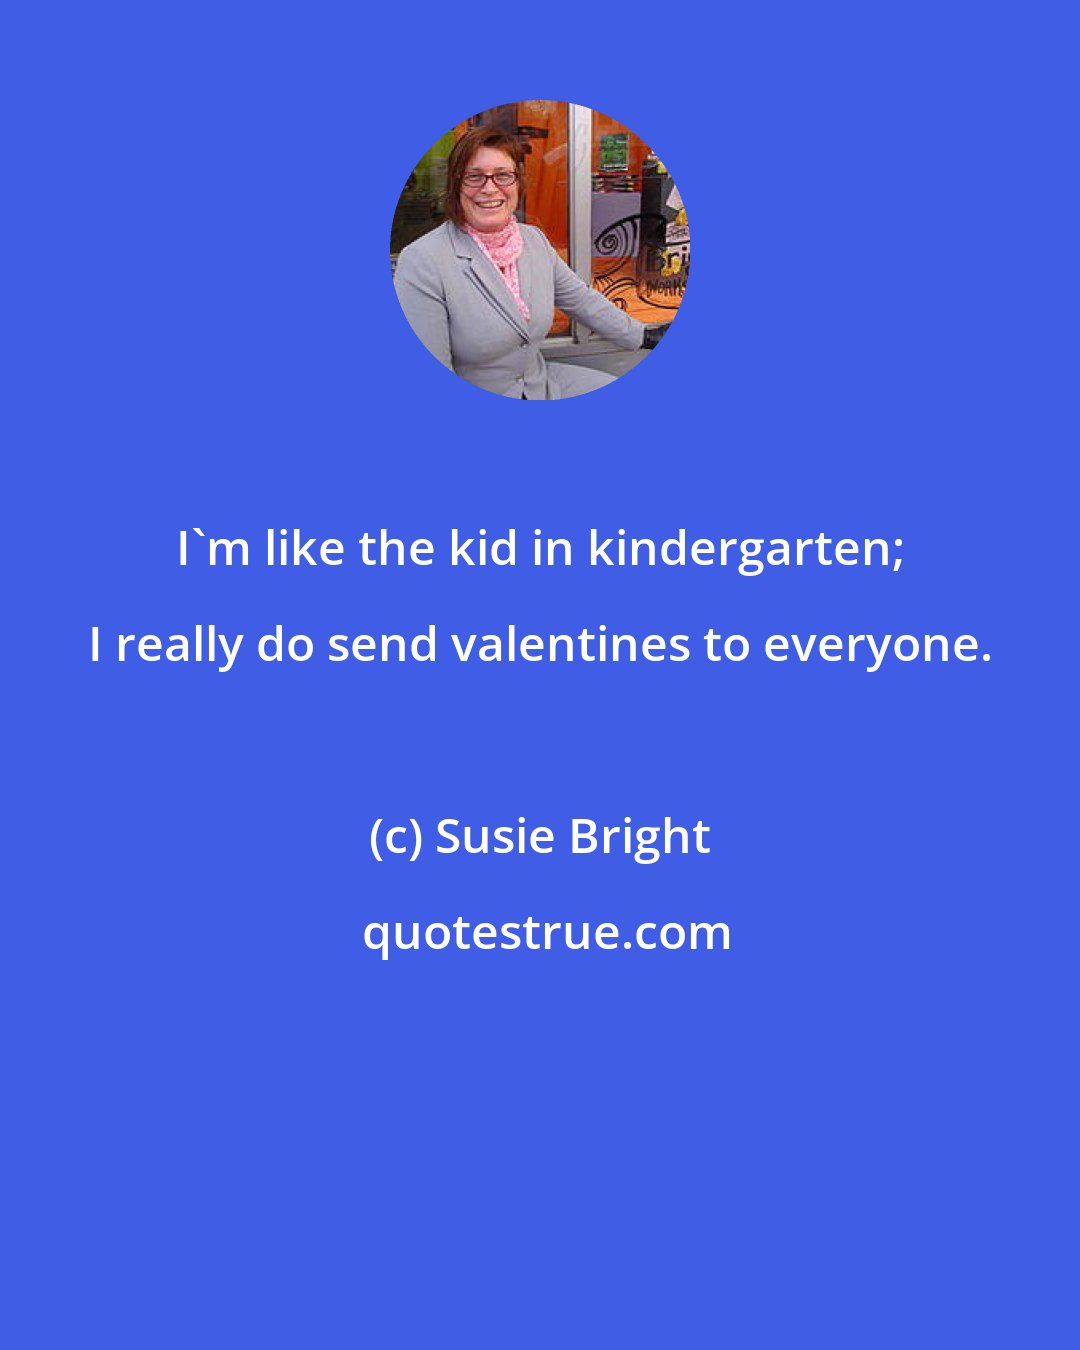 Susie Bright: I'm like the kid in kindergarten; I really do send valentines to everyone.